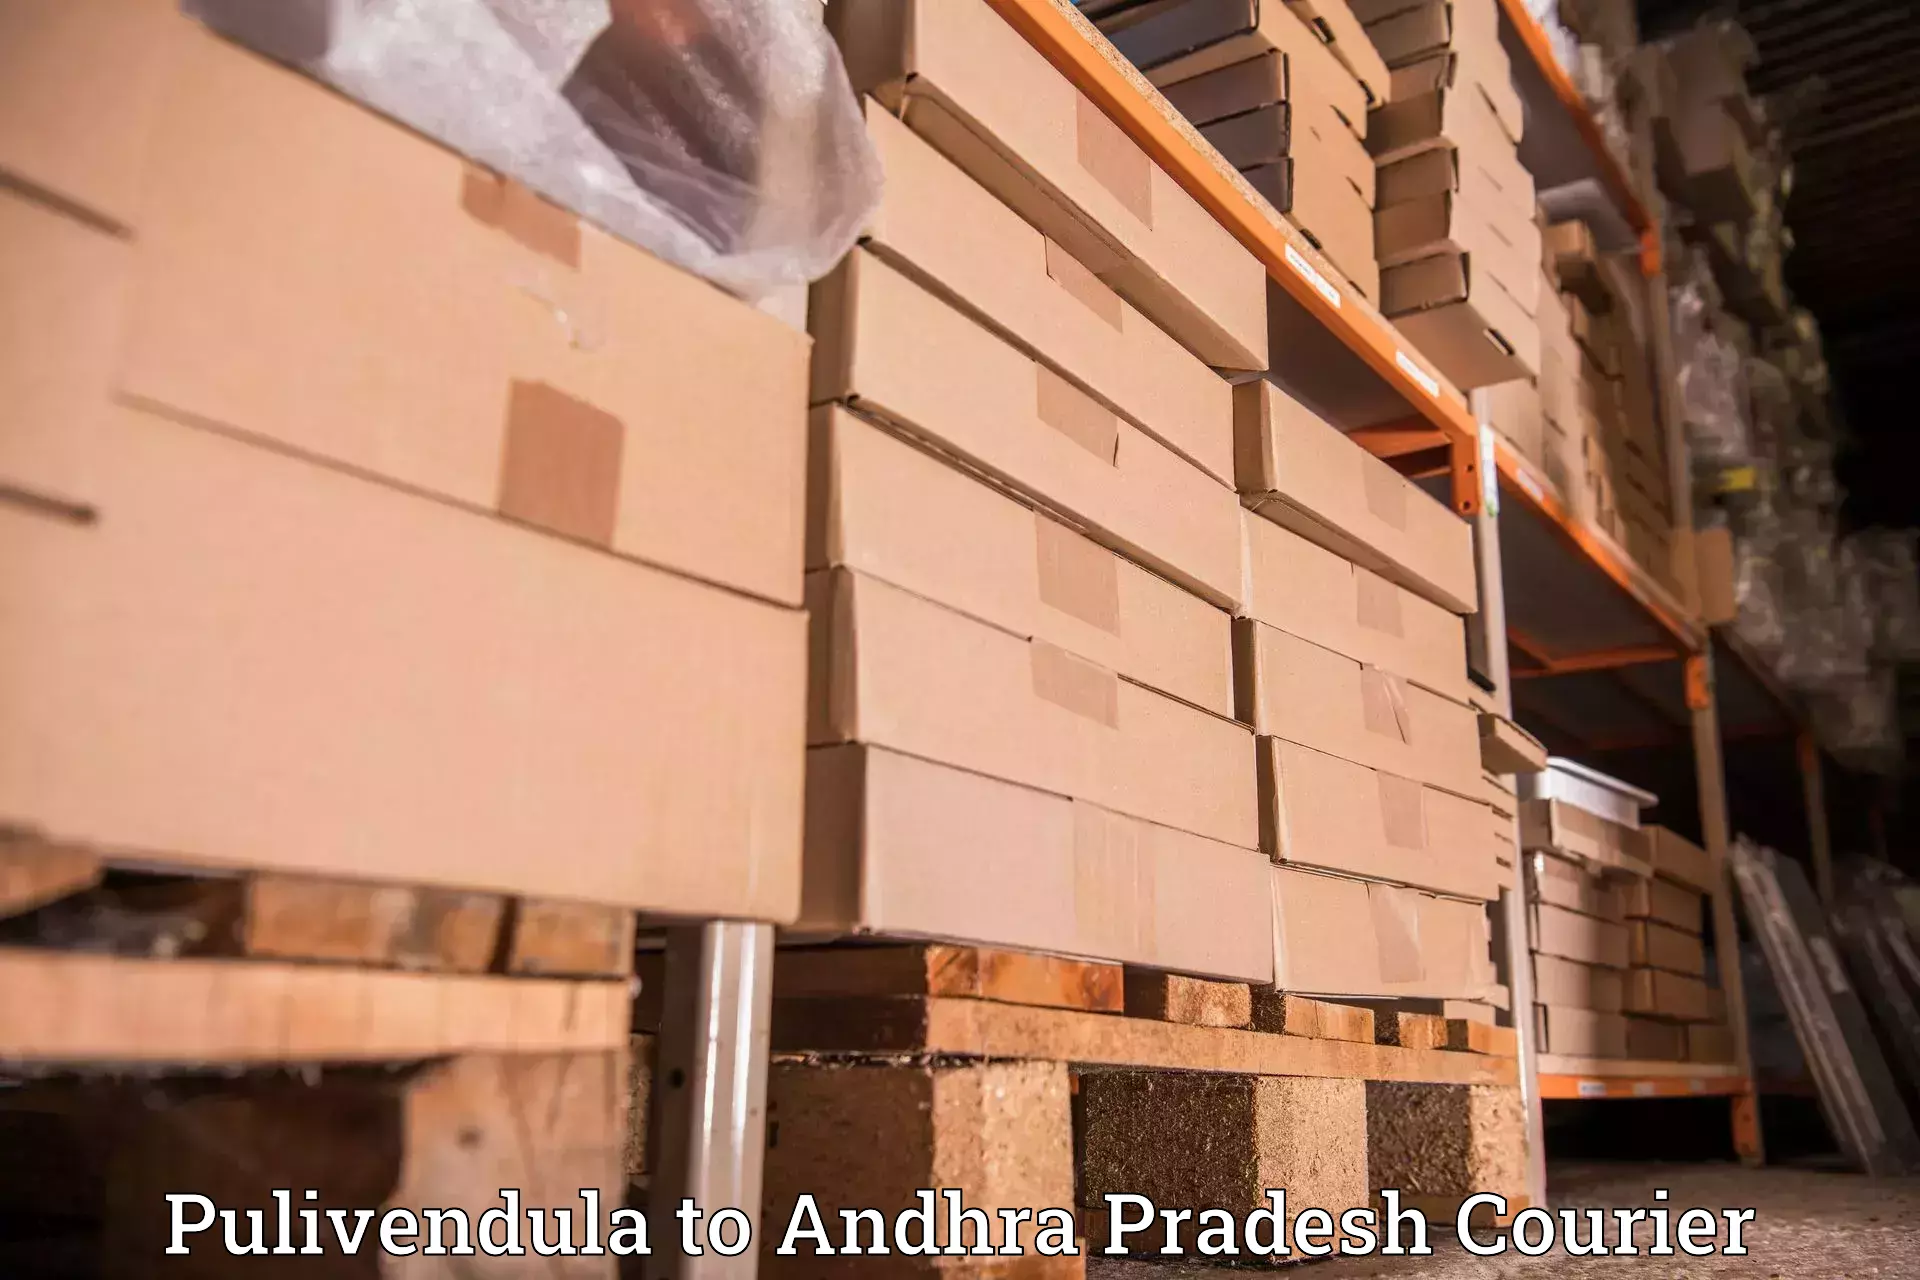 Next-day delivery options in Pulivendula to Kathipudi